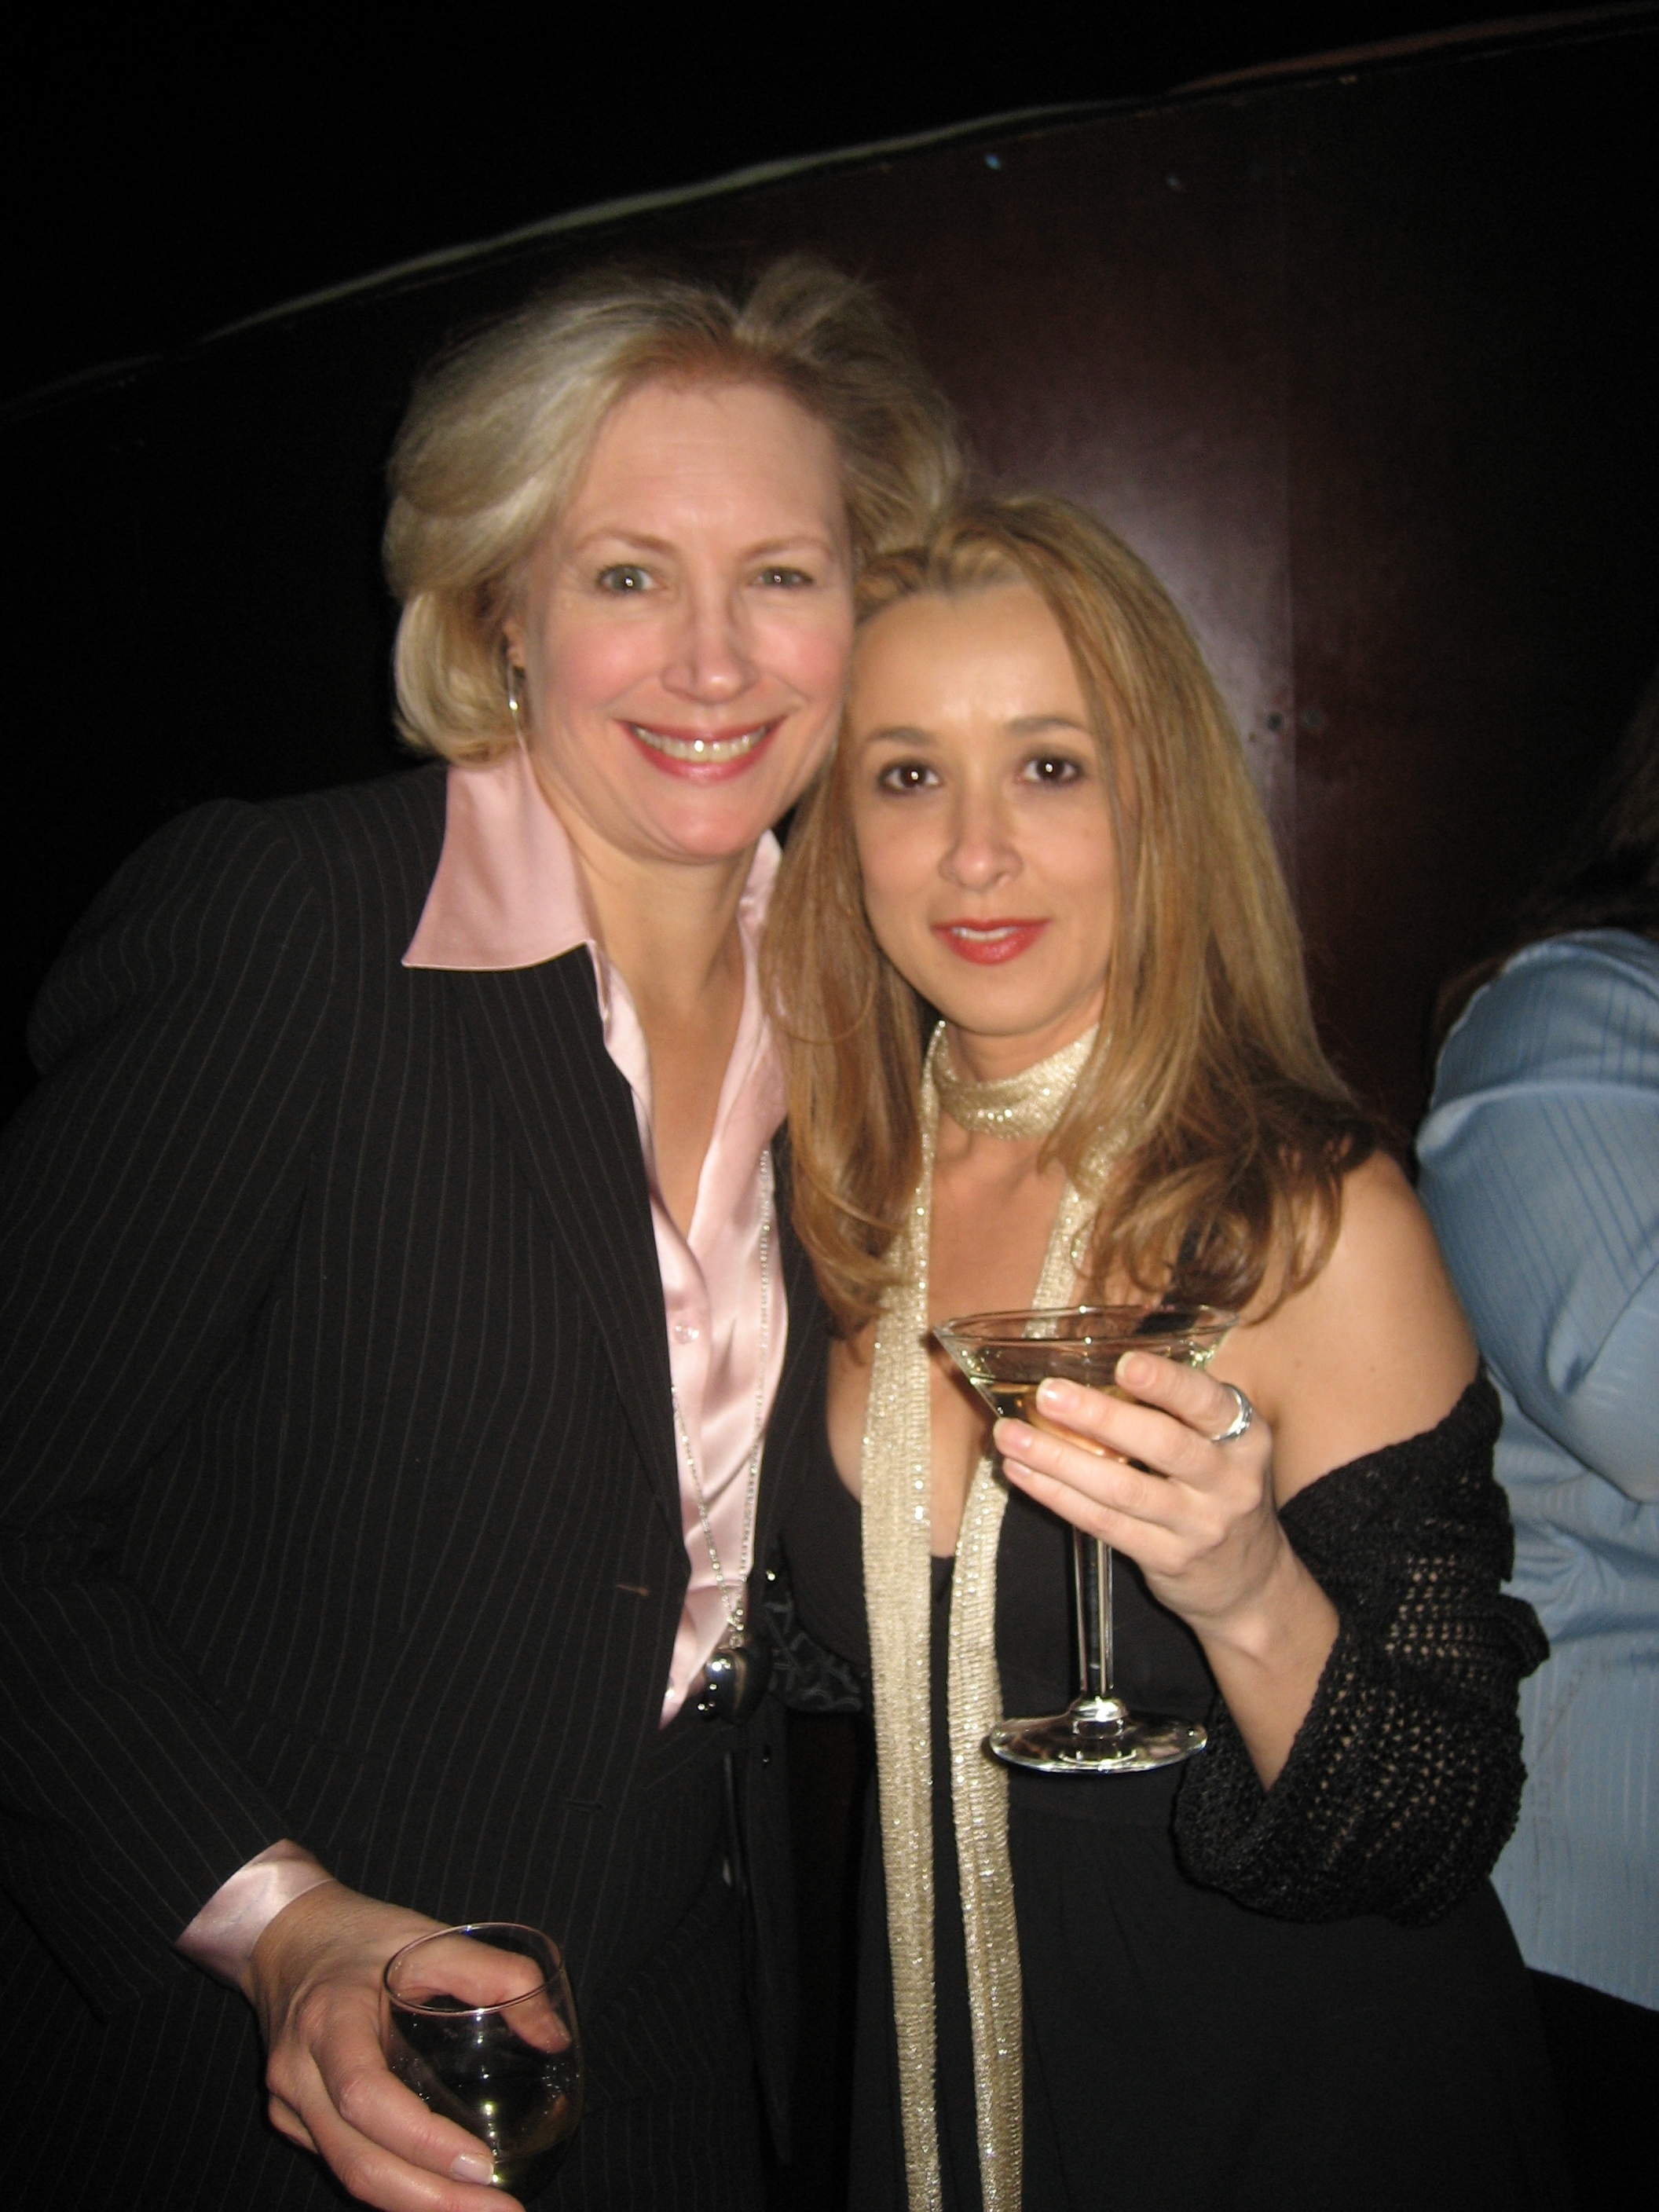 w/agent Nancy Curtis of Harden Curtis at the 2007 Artios Awards